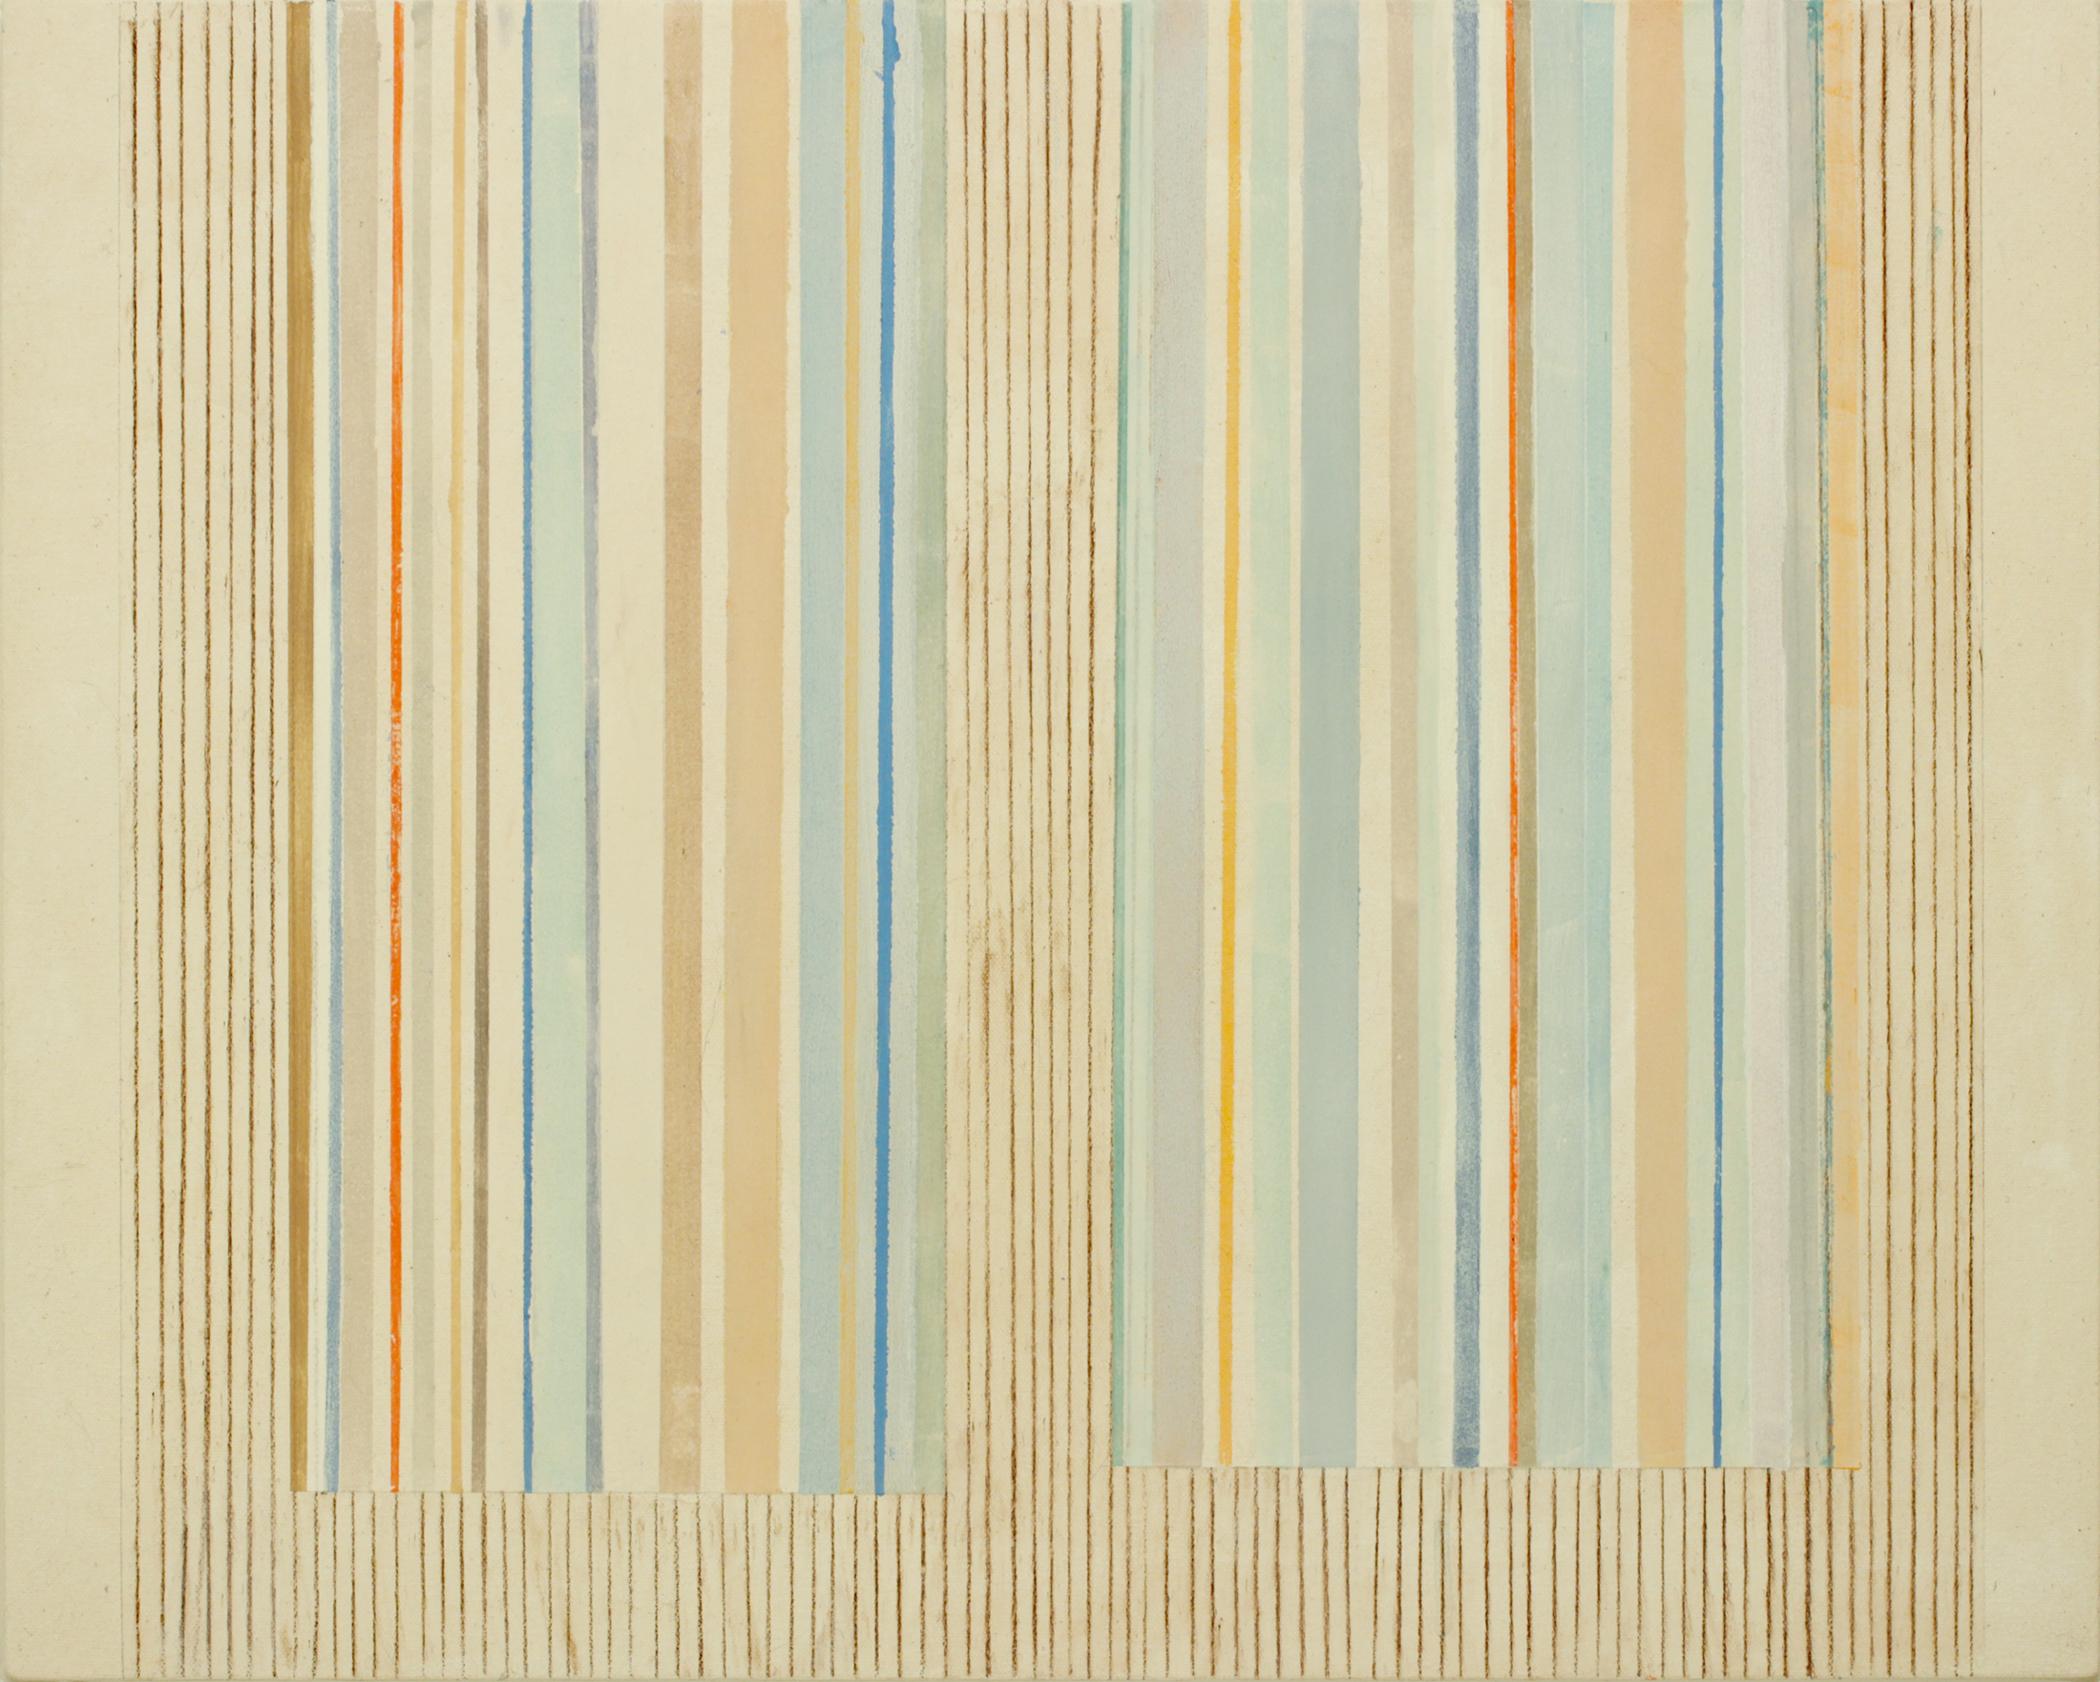 Clean and precise, carefully ordered thin stripes and thicker blocks of color in cobalt blue, dark burnt orange, an olive shade of green brown, golden yellow, gray, pale blue, and brown against a soft beige background. Signed, dated and titled on